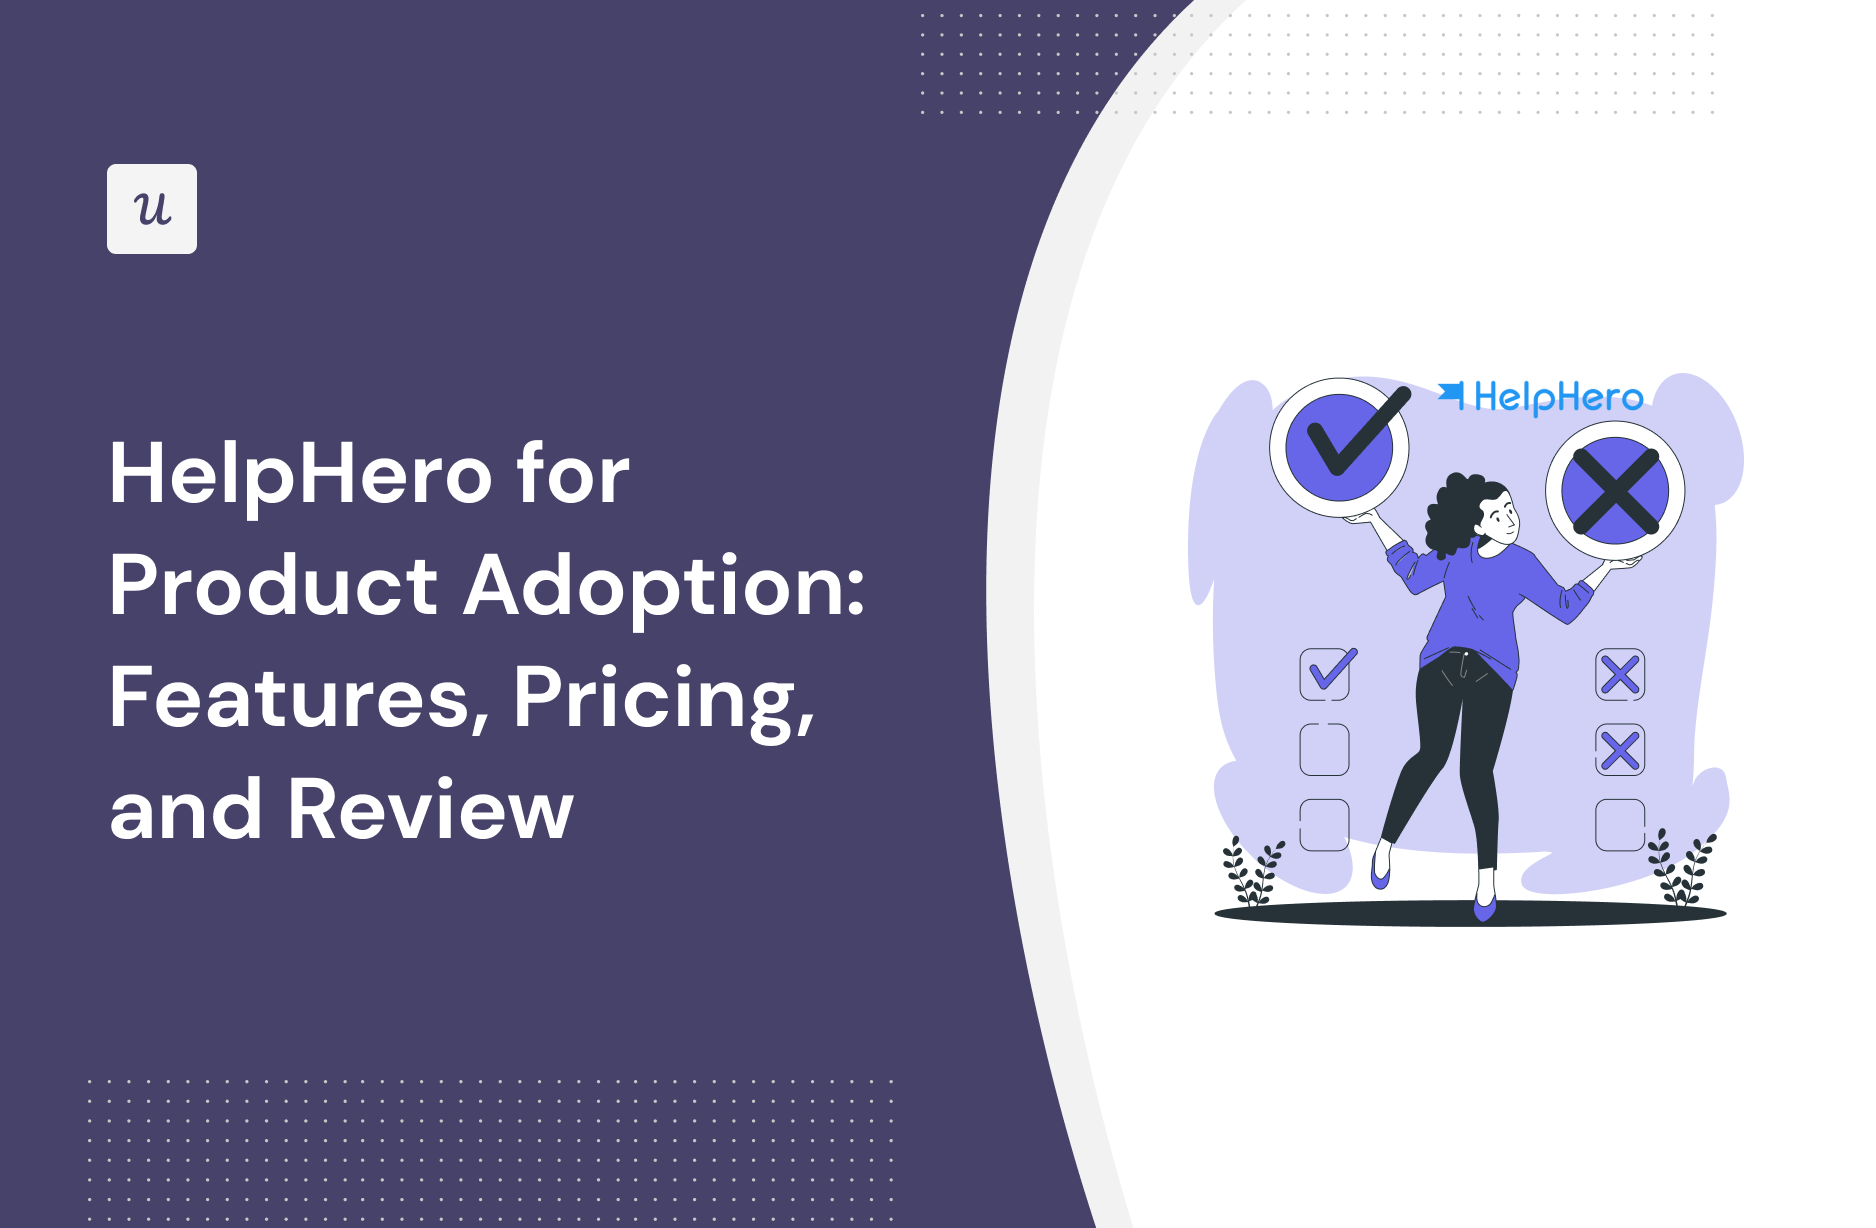 HelpHero for Product Adoption: Features, Pricing, and Review